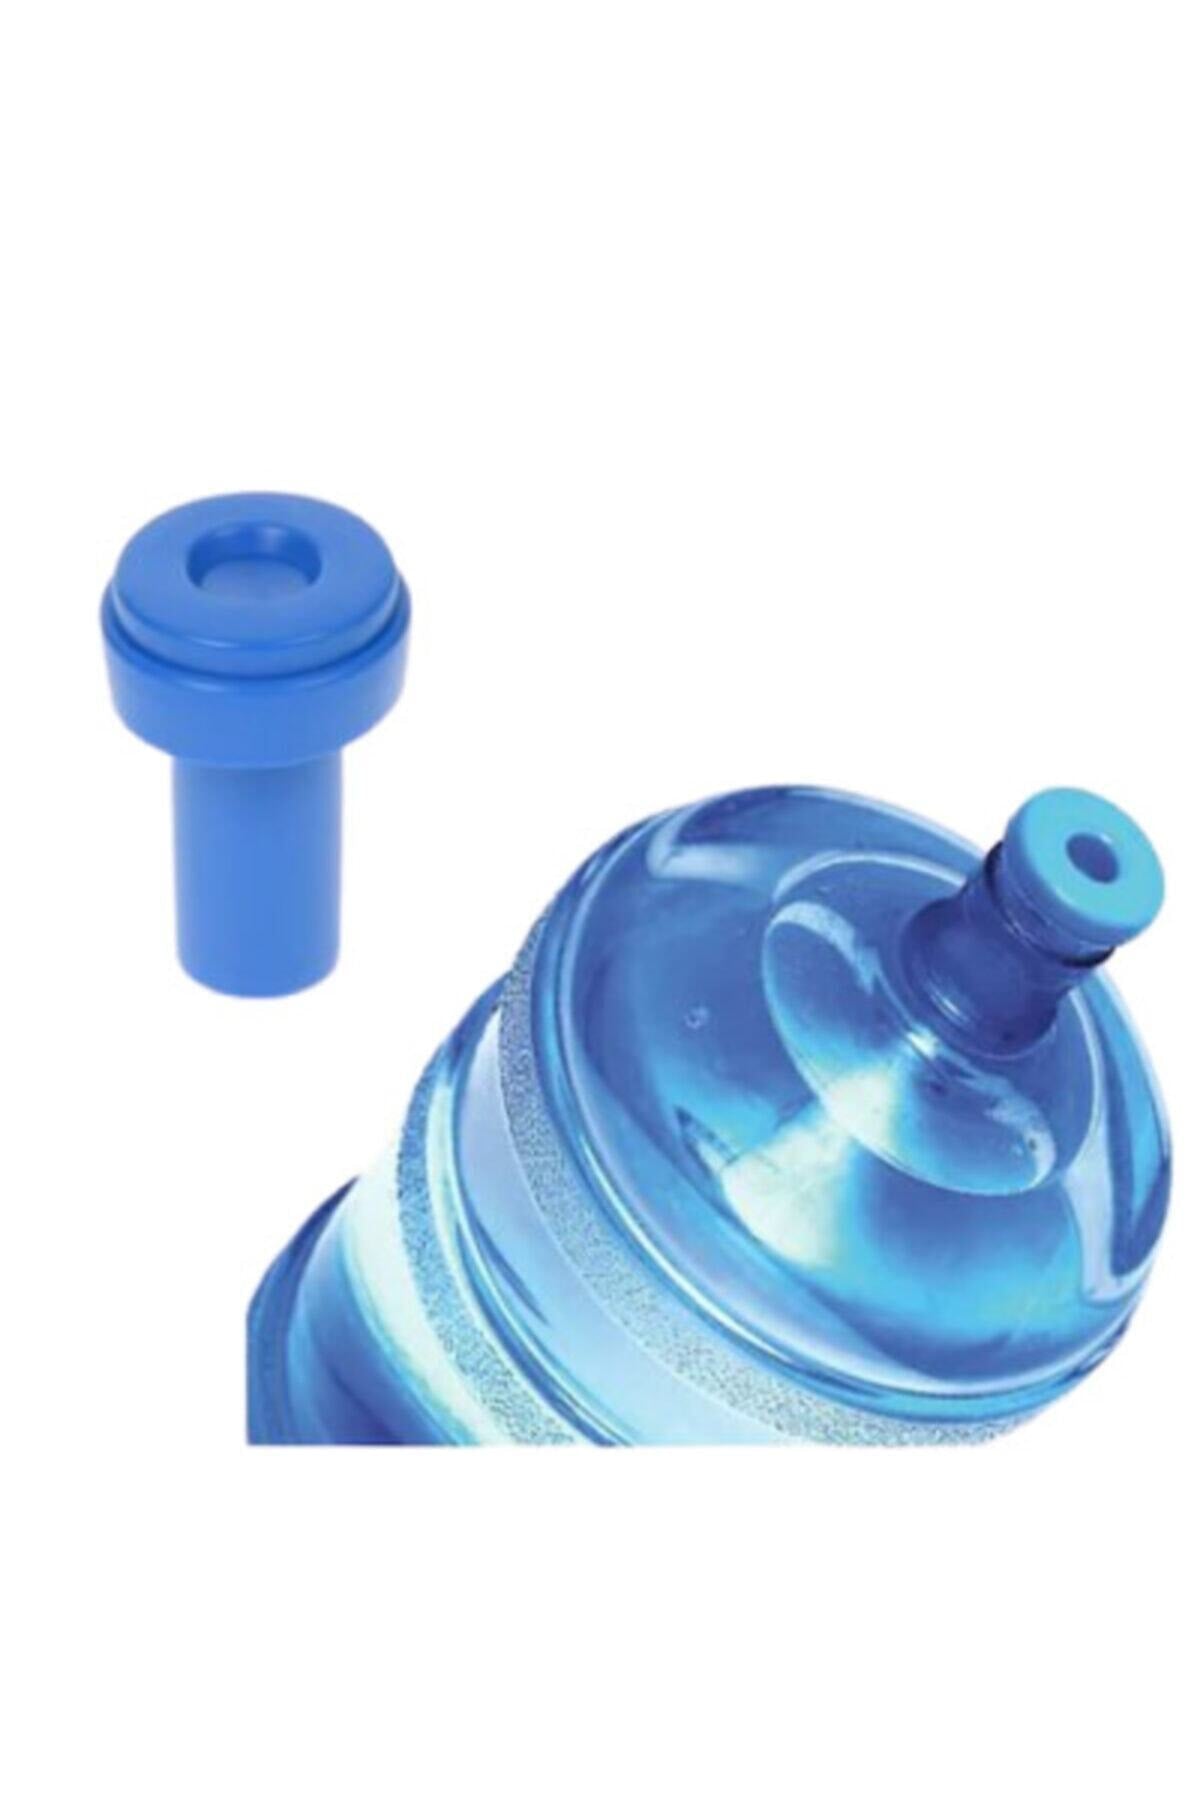 Universal Water Dispenser Spring Water Carboy Cap Kitchenware Water Dispenser Bottle Spring Water Cover Spare Parts Accessory